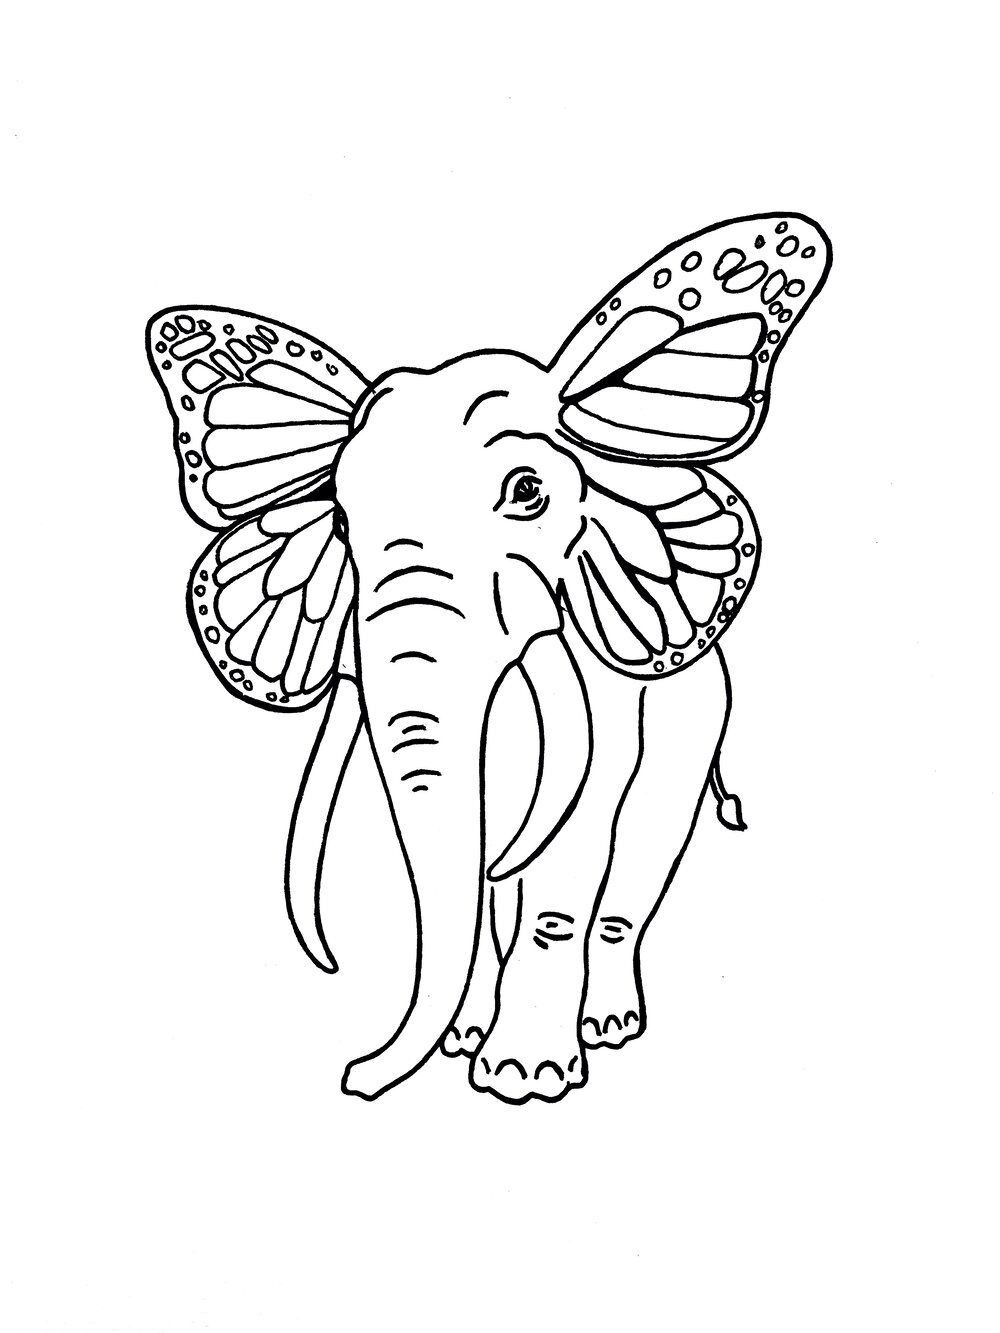 Simple coloring pages â a million tiny lines